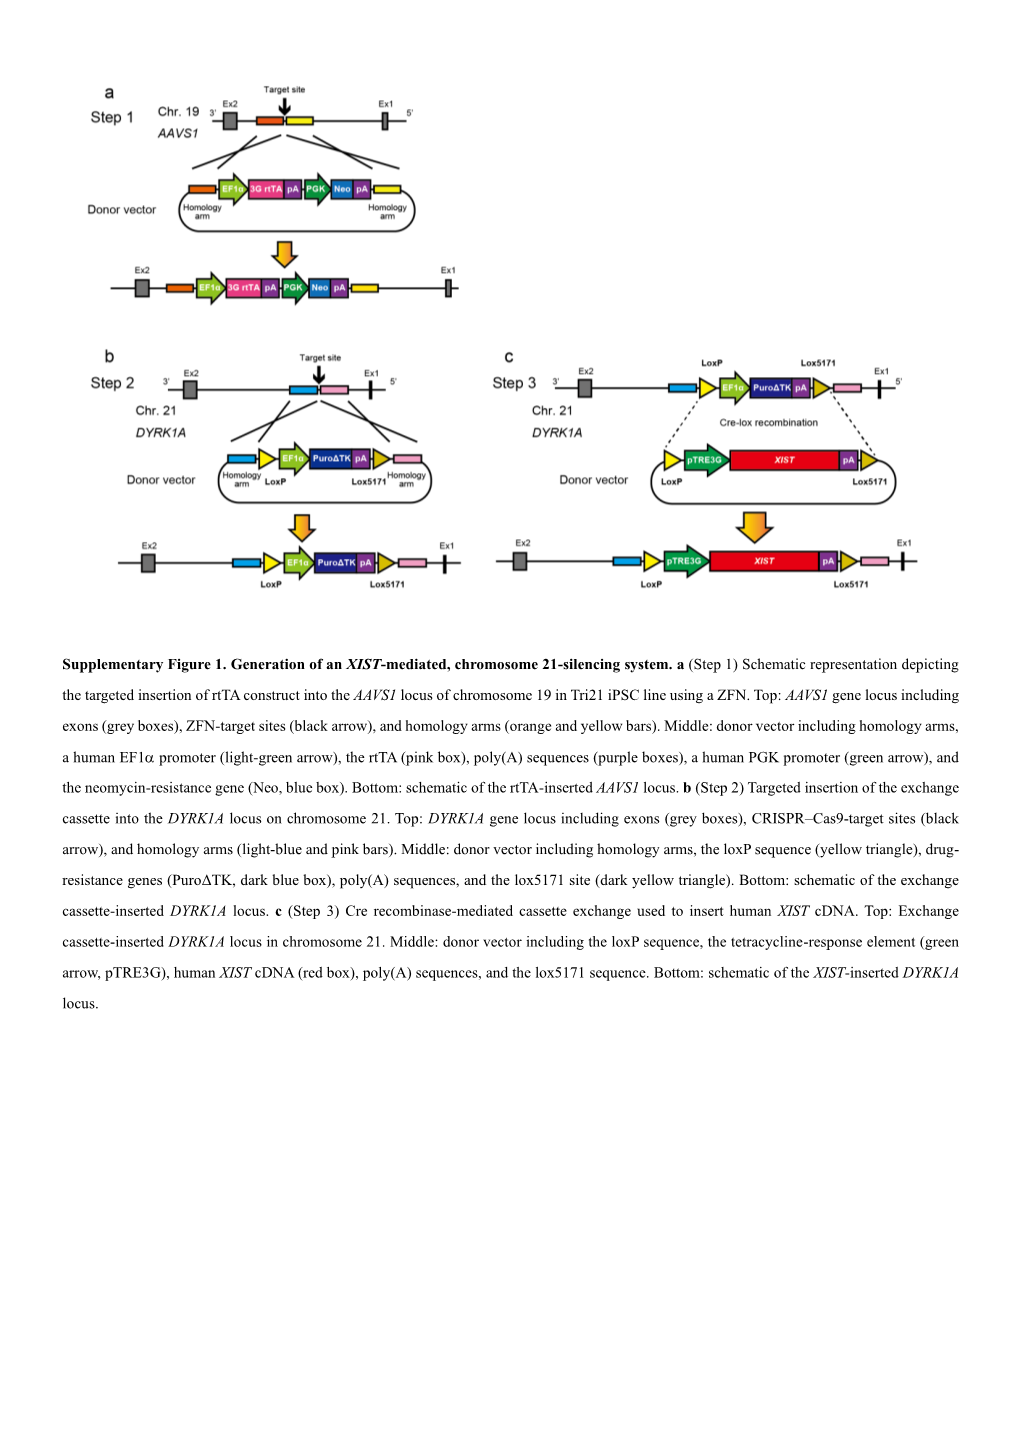 Supplementary Figure 1. Generation of an XIST-Mediated, Chromosome 21-Silencing System